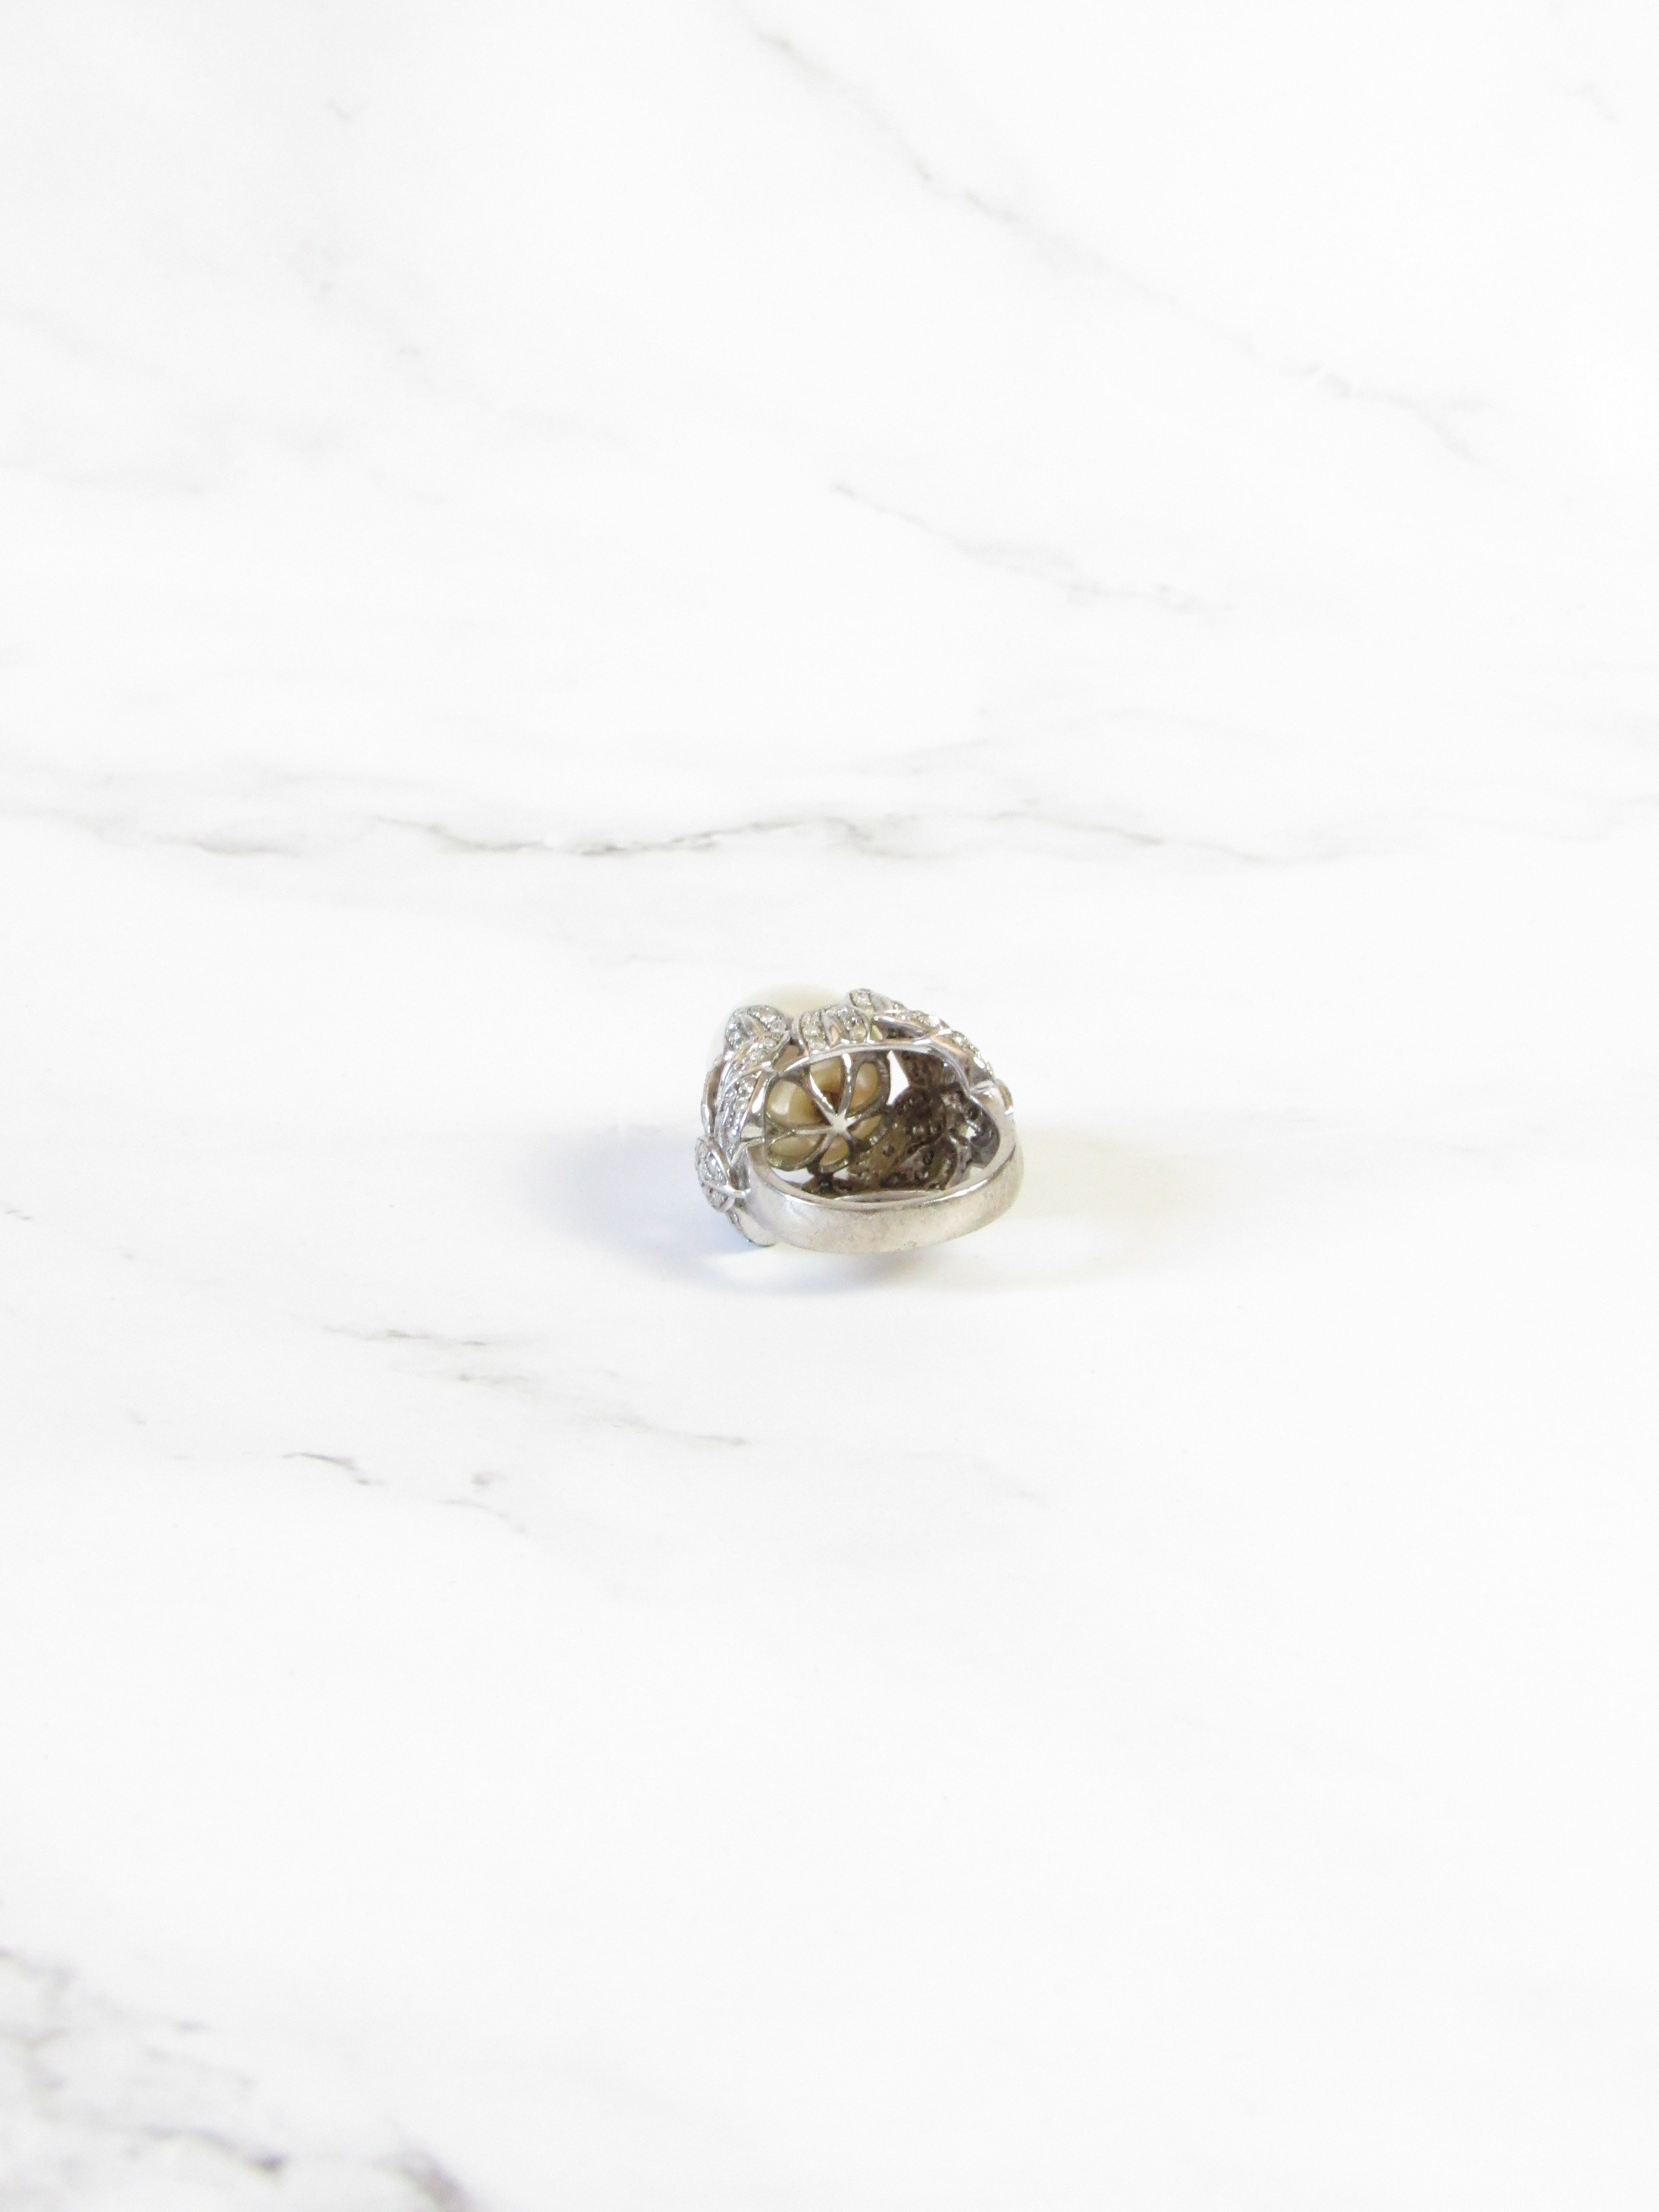 Akoya Pearl Ring in White Gold with Diamond Accents